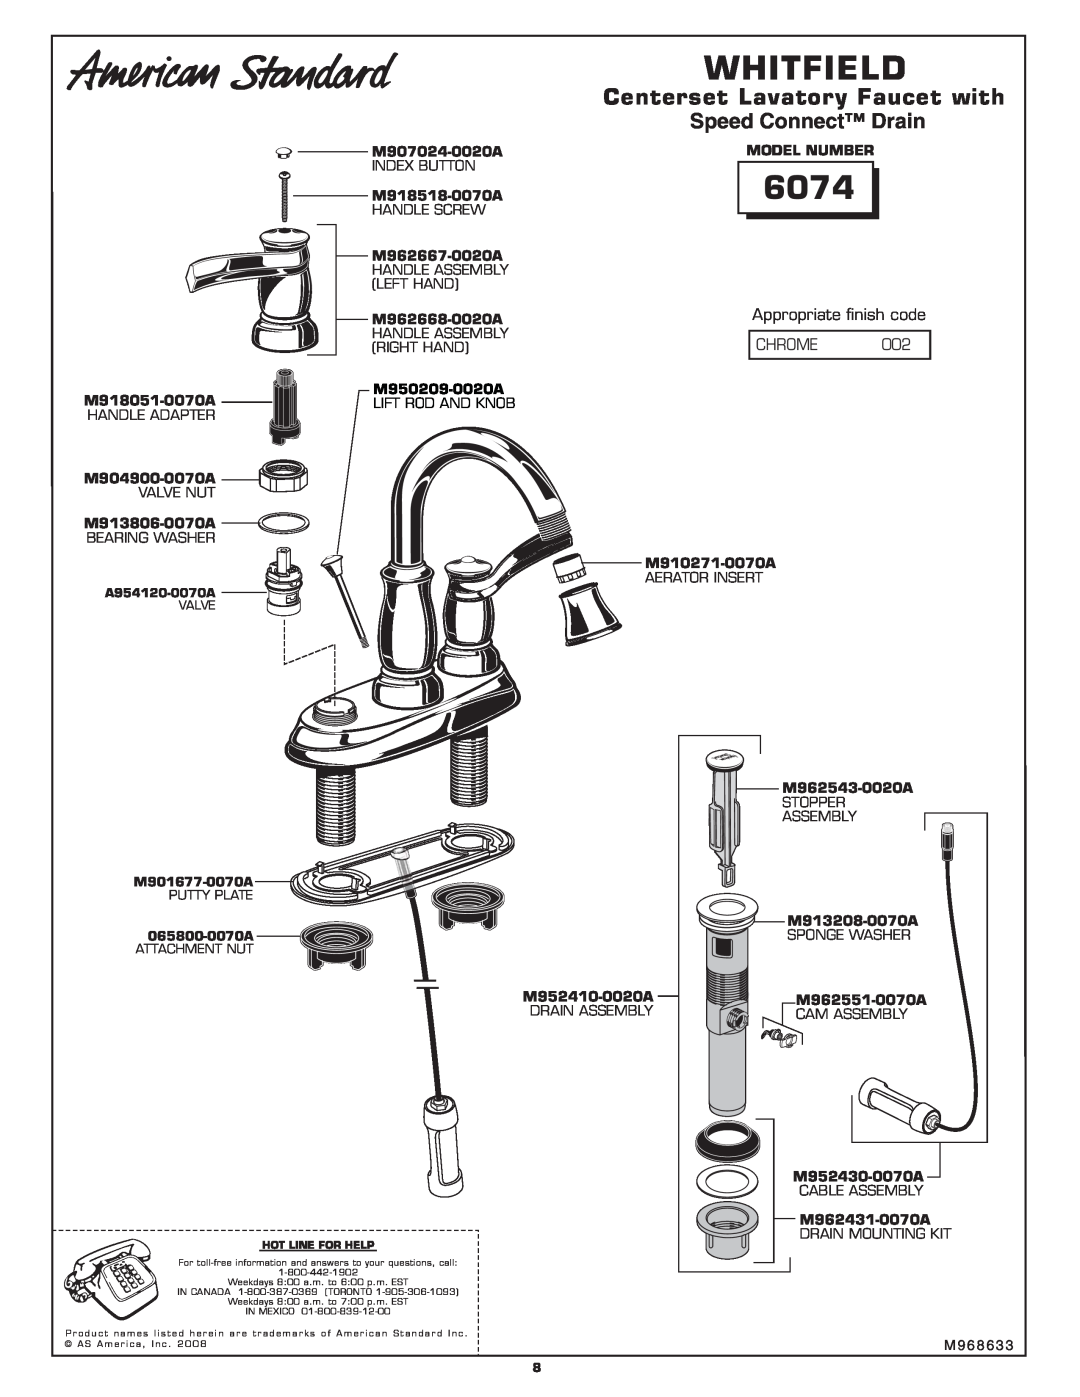 American Standard 6074 manual Whitfield, Centerset Lavatory Faucet with, Speed Connect Drain, Appropriate ﬁnish code 